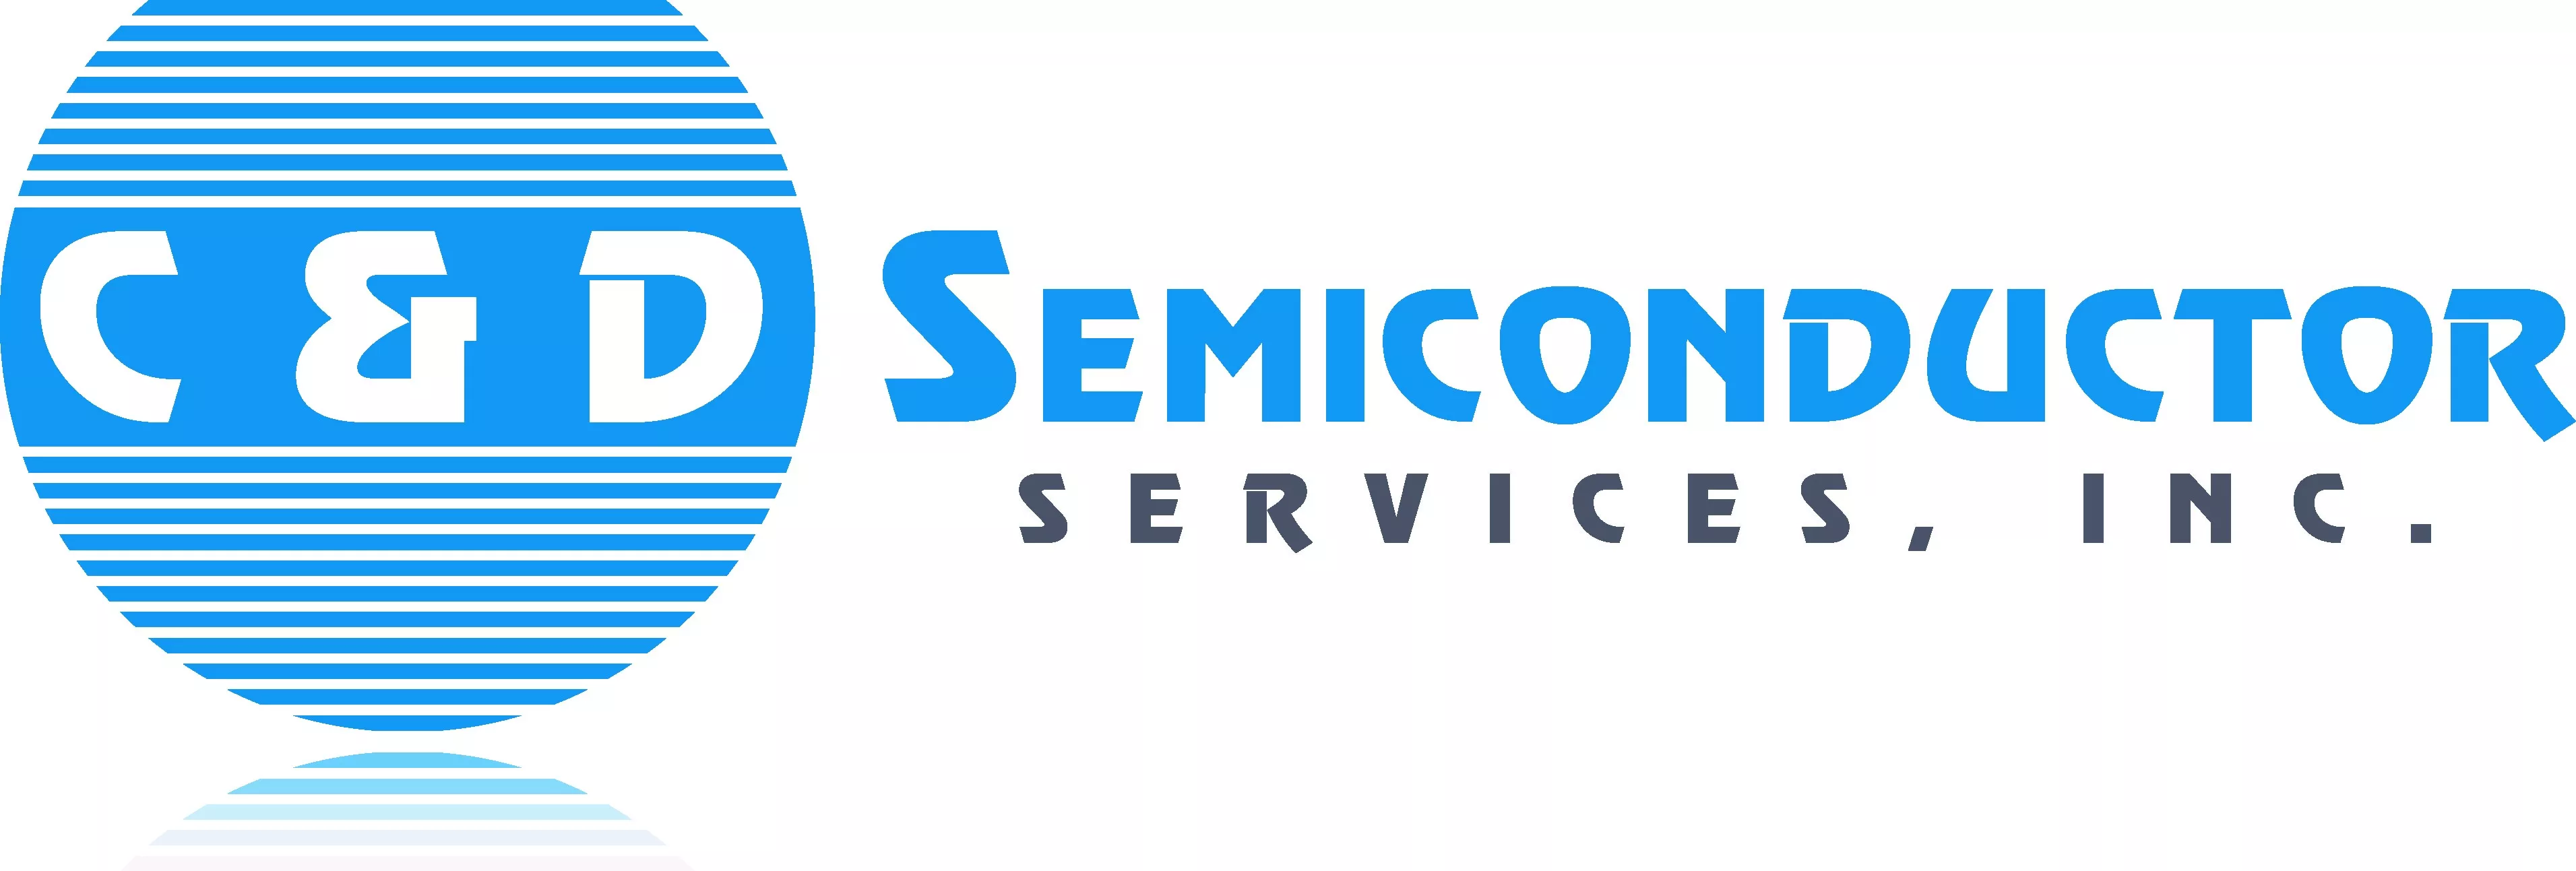 C&D Semiconductor